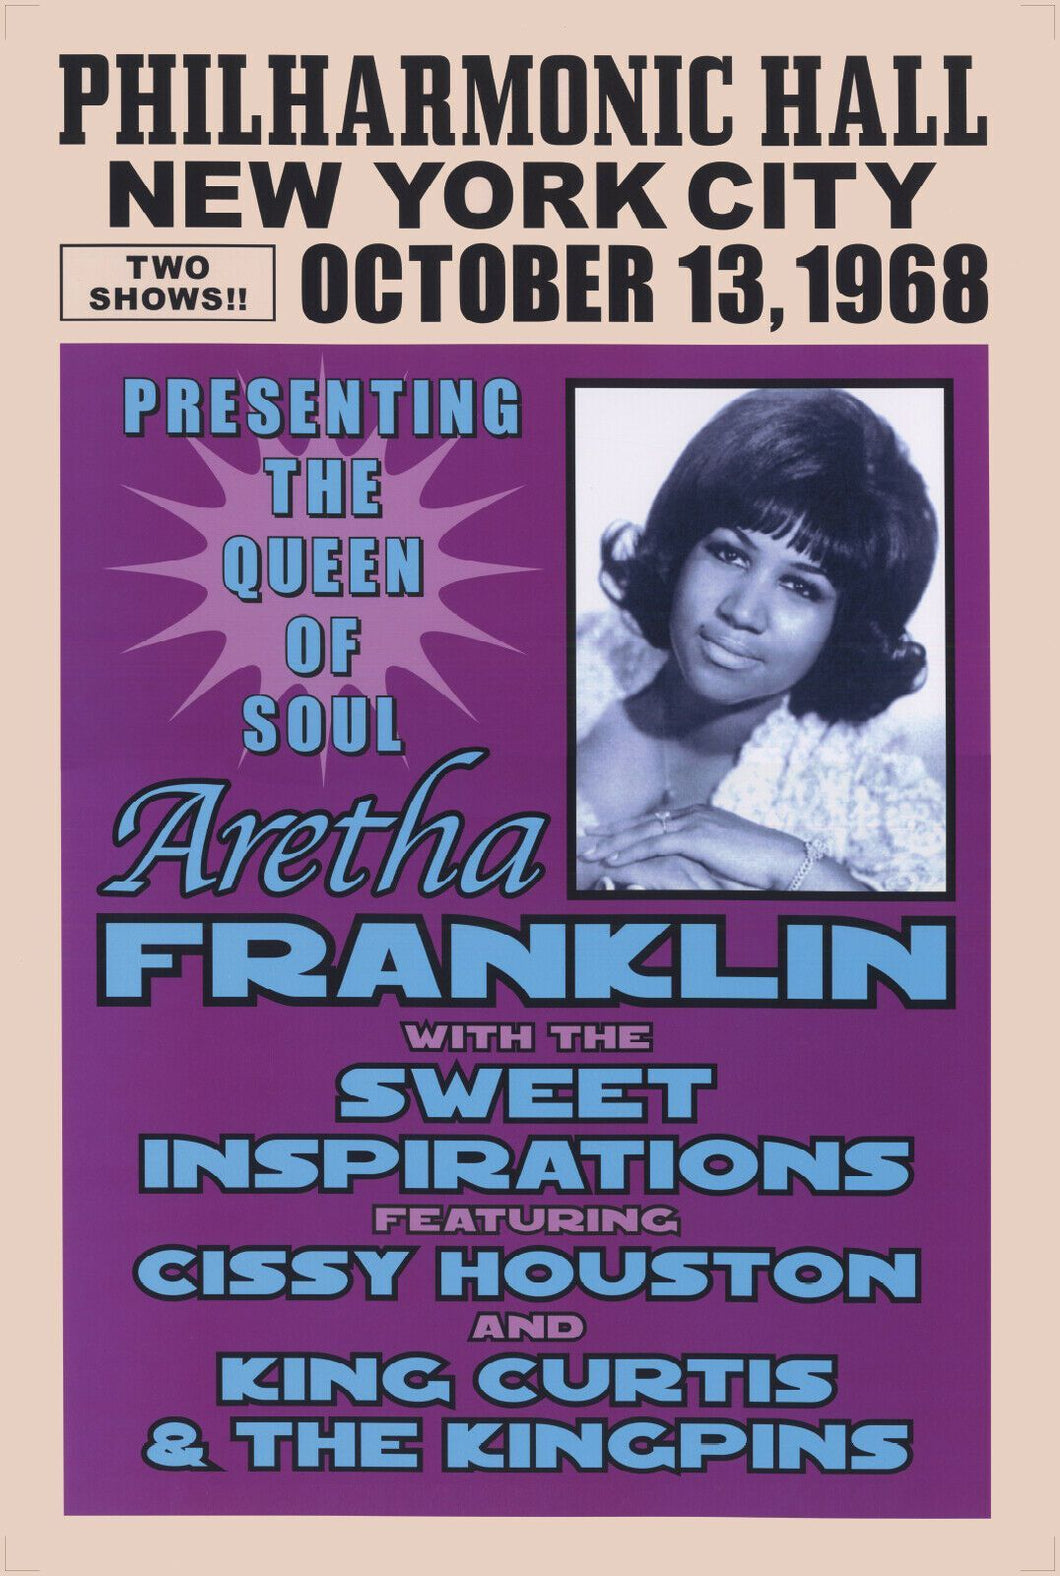 Aretha Franklin concert poster - King Curtis Philharmonic Hall New York 1968 A2 size - Original Music and Movie Posters for sale from Bamalama - Online Poster Store UK London